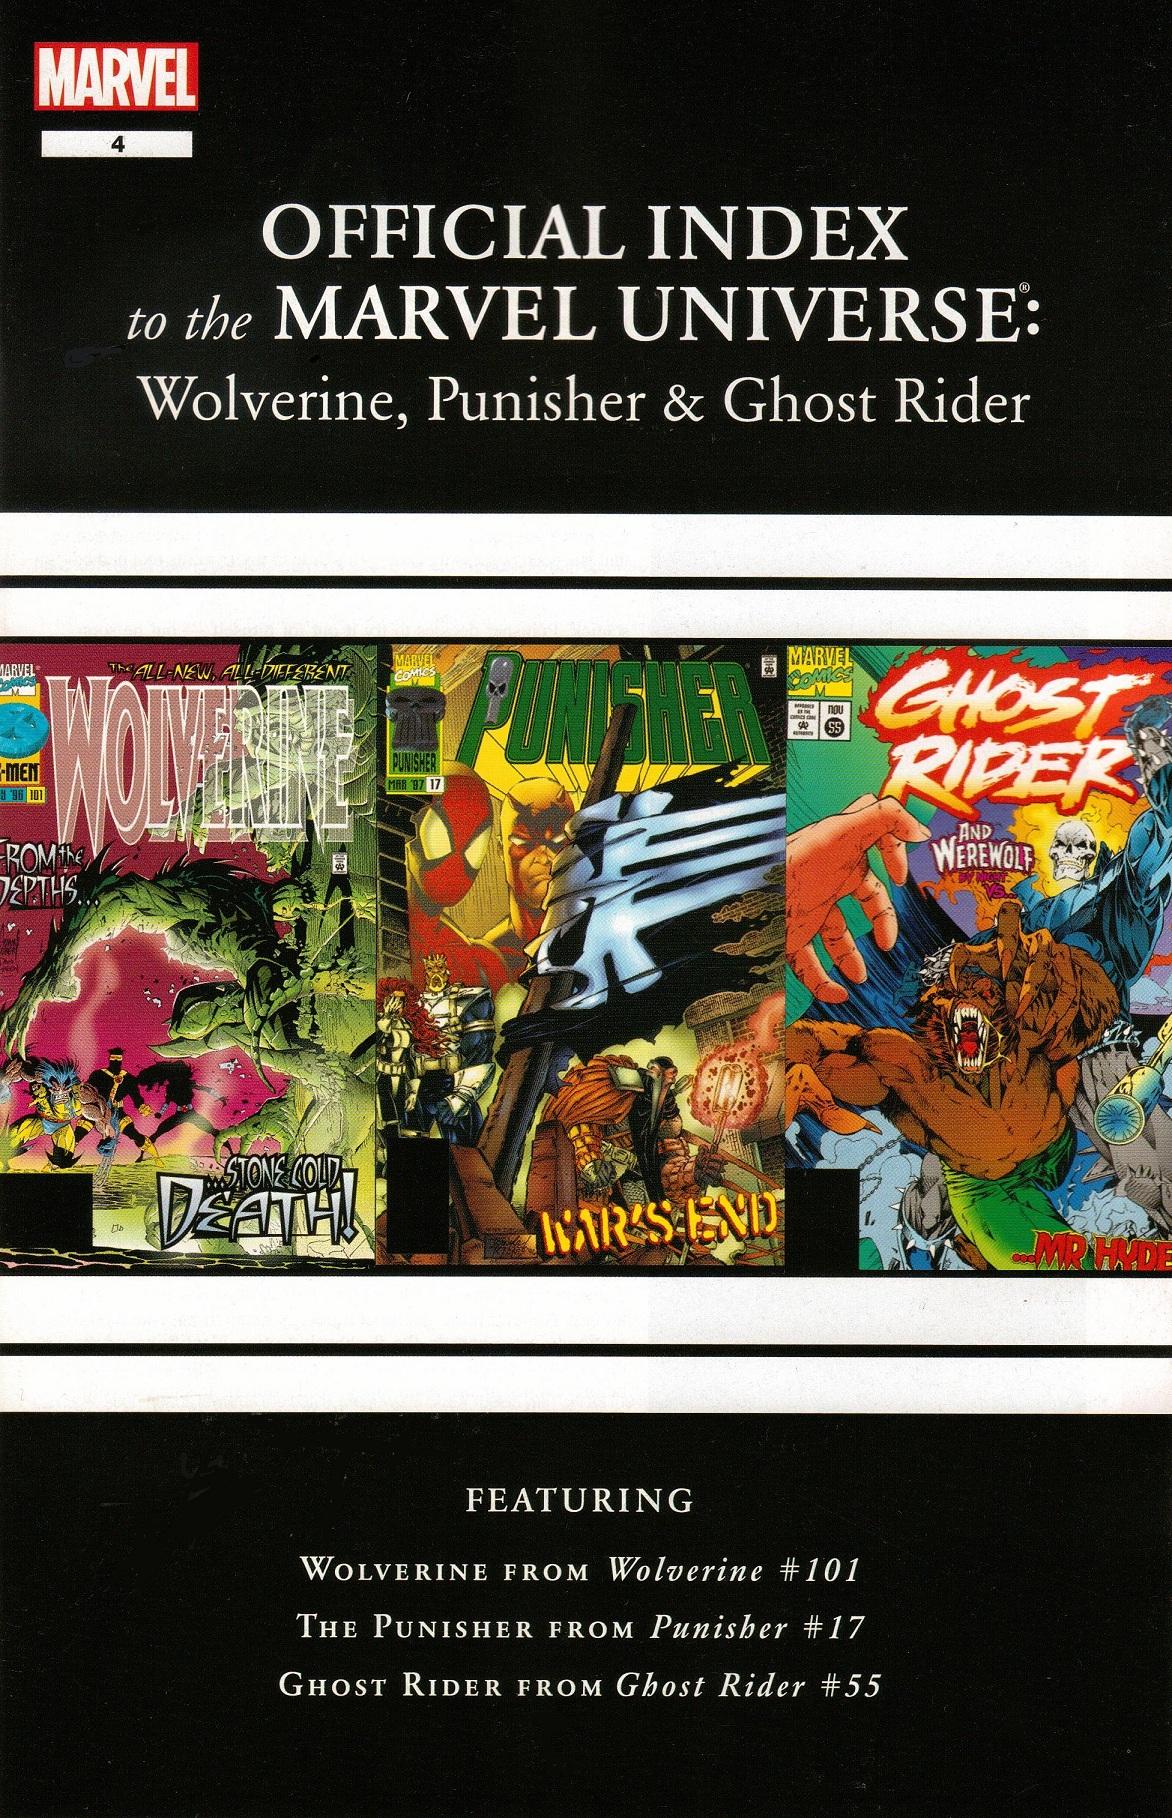 Wolverine, Punisher & Ghost Rider: Official Index to the Marvel Universe Vol. 1 #4